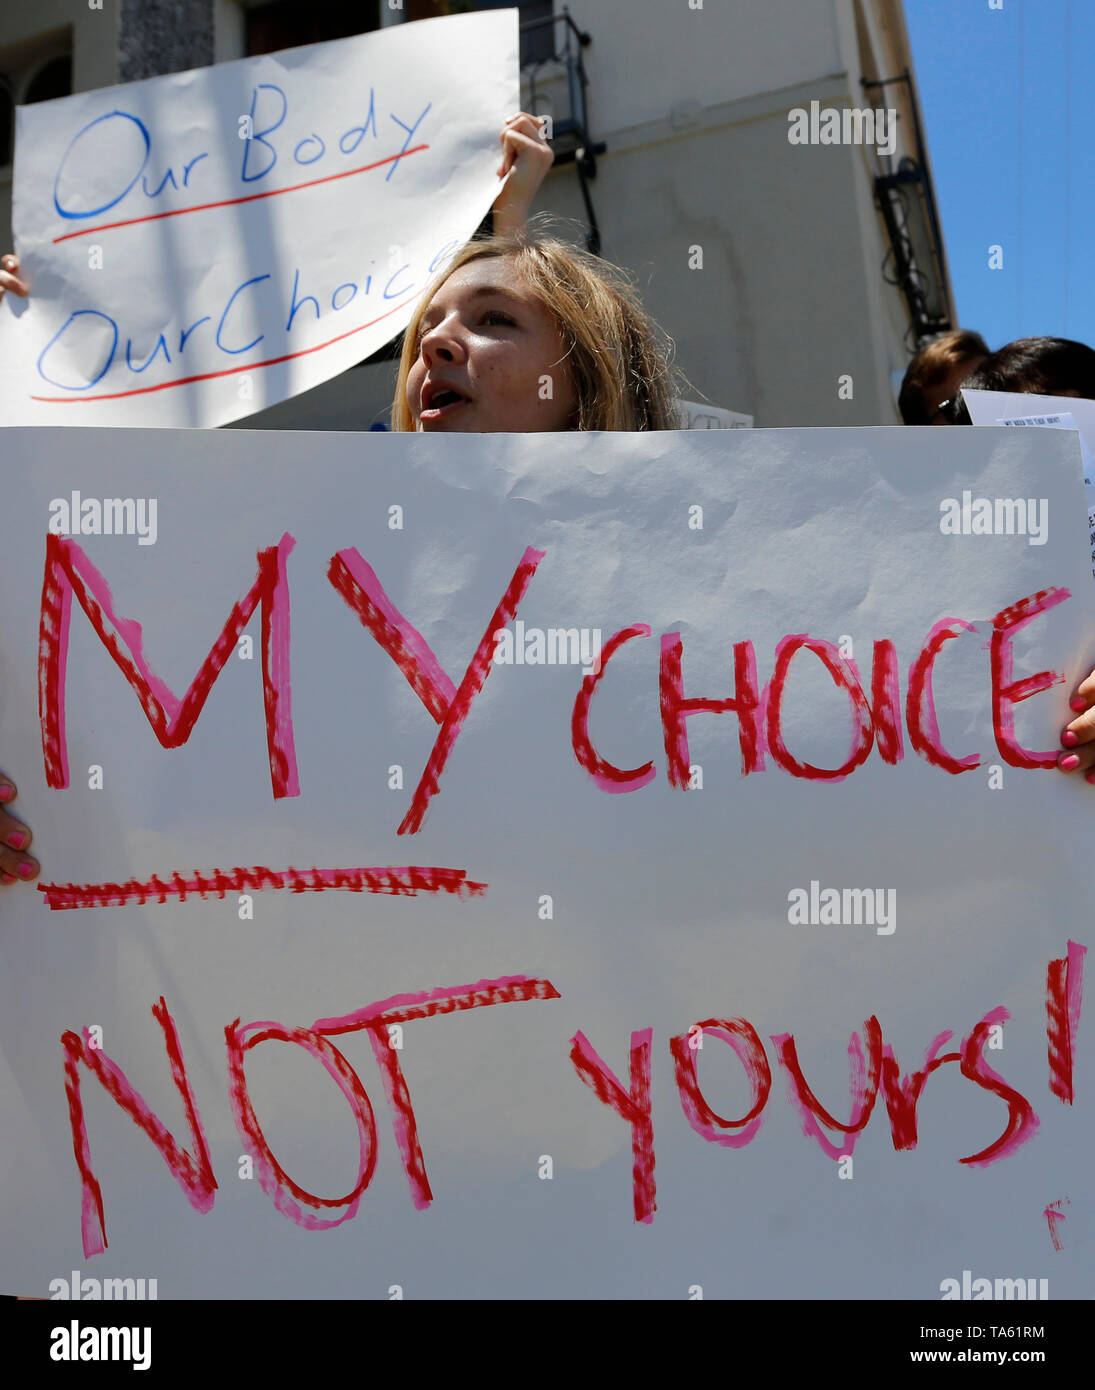 Los Angeles, USA. 21st May, 2019. A woman attends a rally in Los Angeles, the United States, on May 21, 2019. Dozens of rallies were held Tuesday in southern California's major cities to denounce the growing number of states passing restrictive abortion laws and demand women's rights in the contentious abortion issue. Credit: Li Ying/Xinhua/Alamy Live News Stock Photo